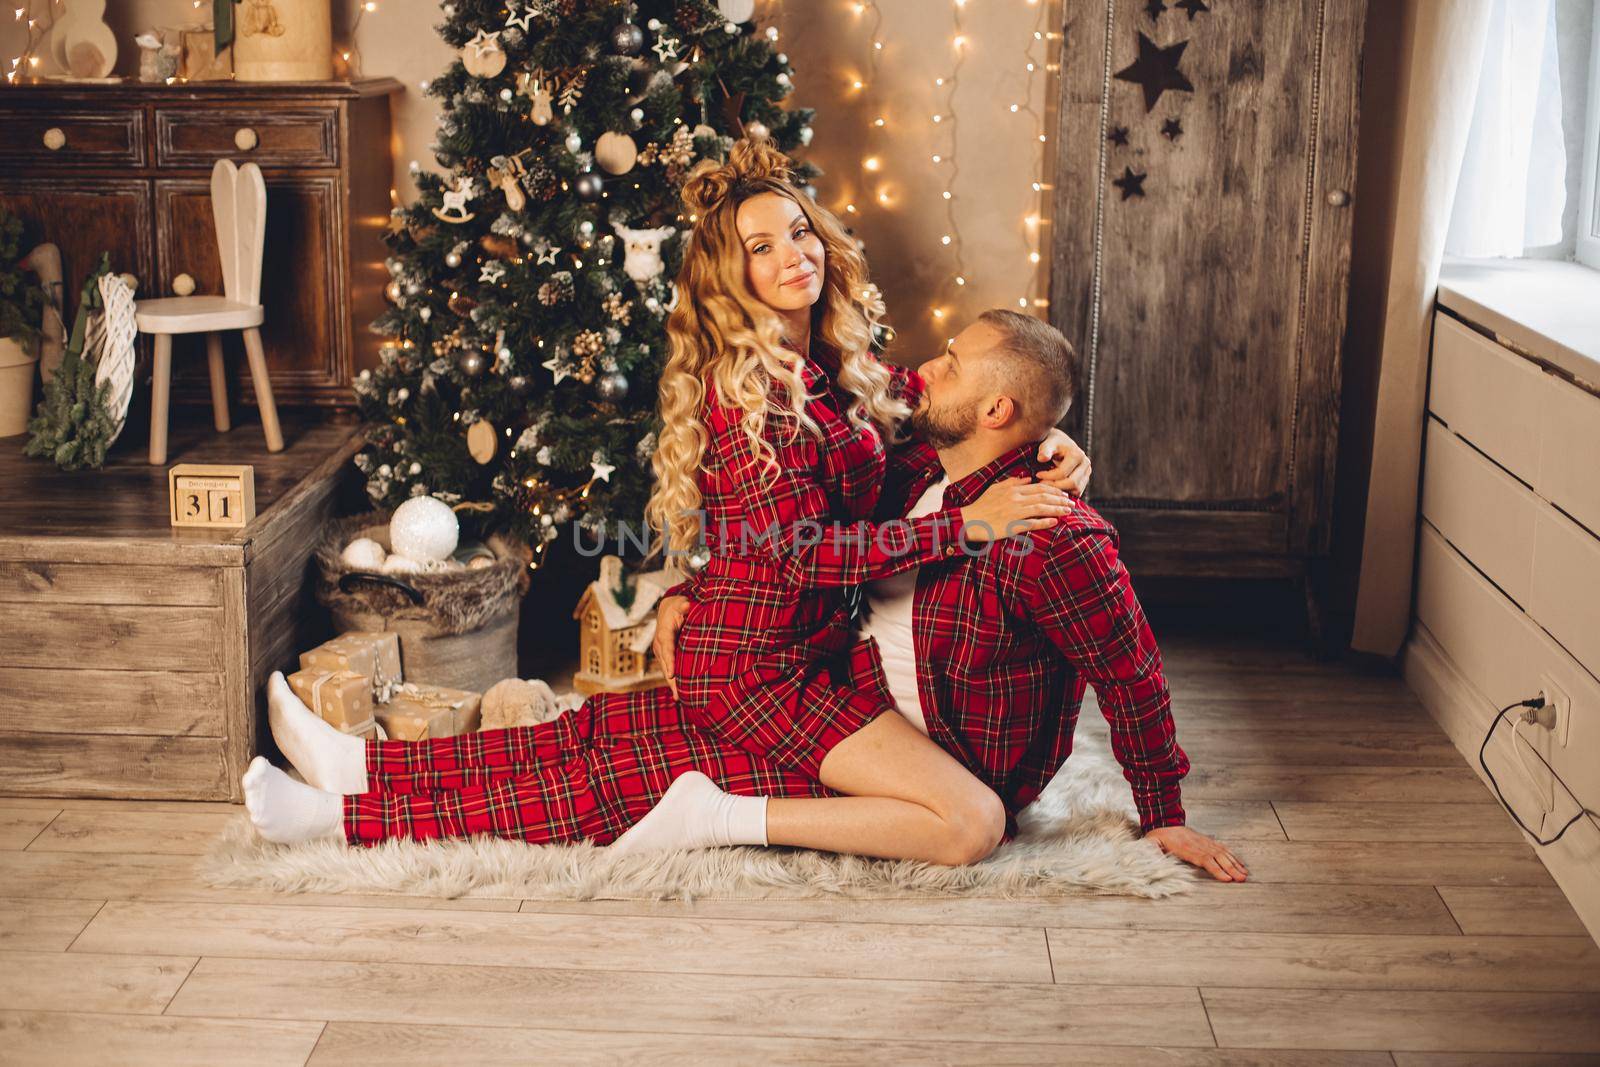 Happy couple in love sitting next to Christmas tree on the floor of a house. Holiday concept